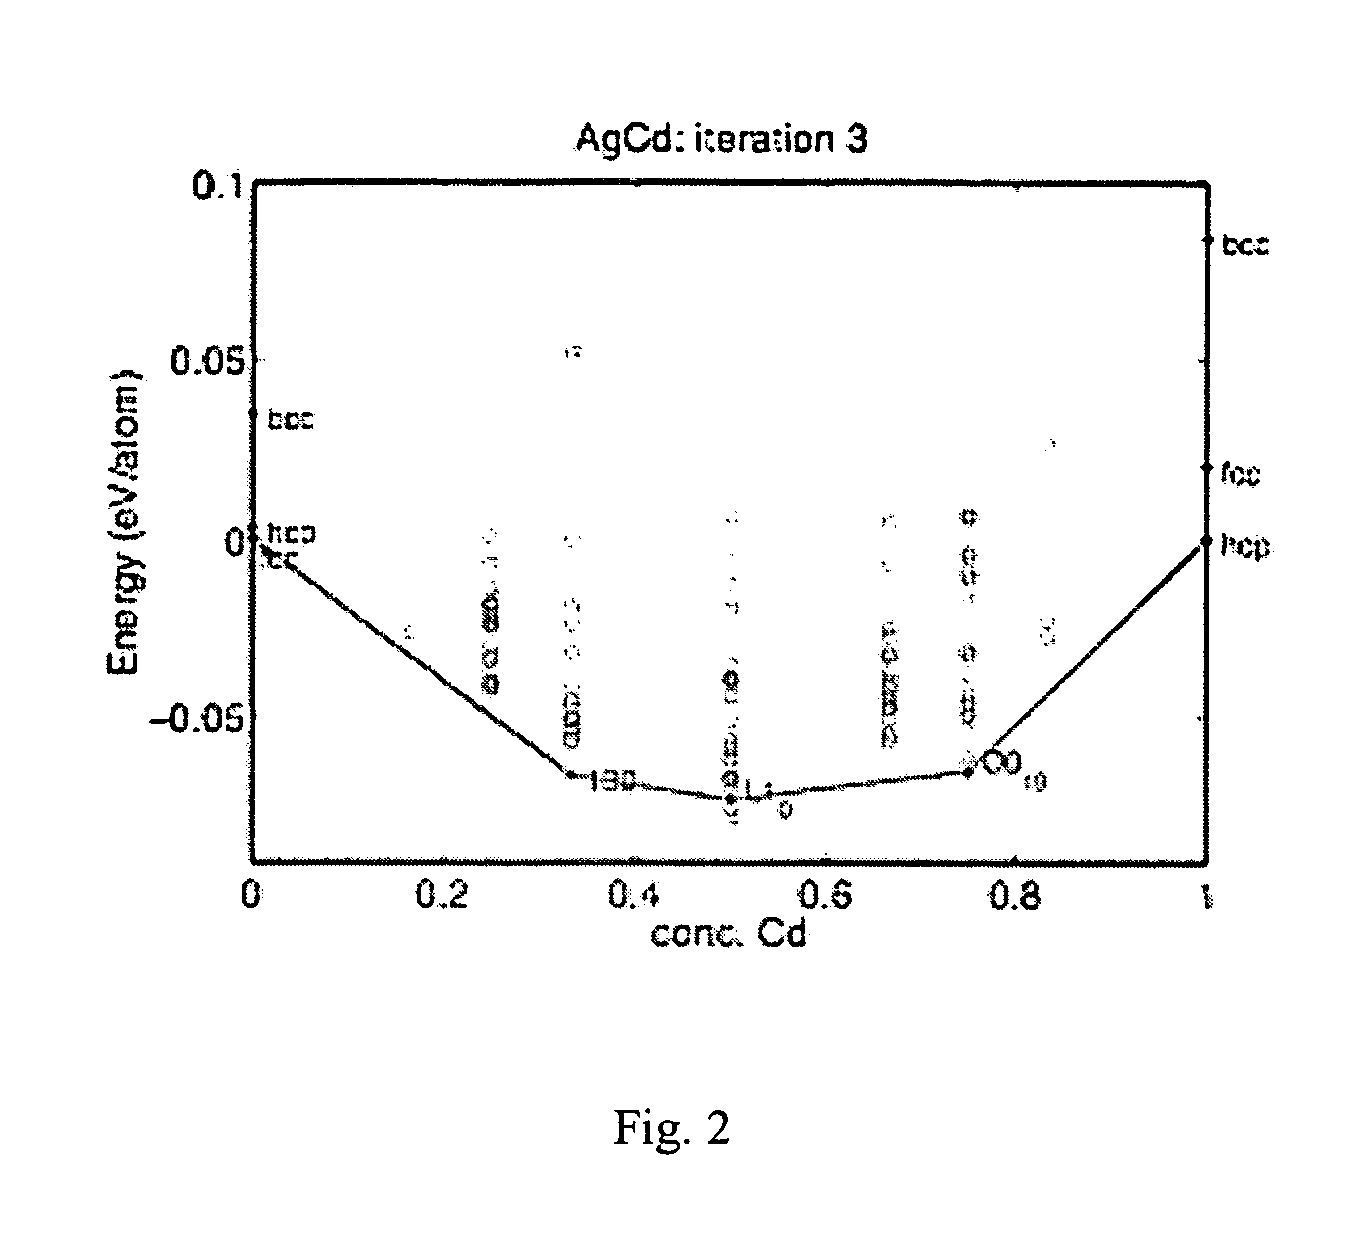 Systems and methods for predicting materials properties